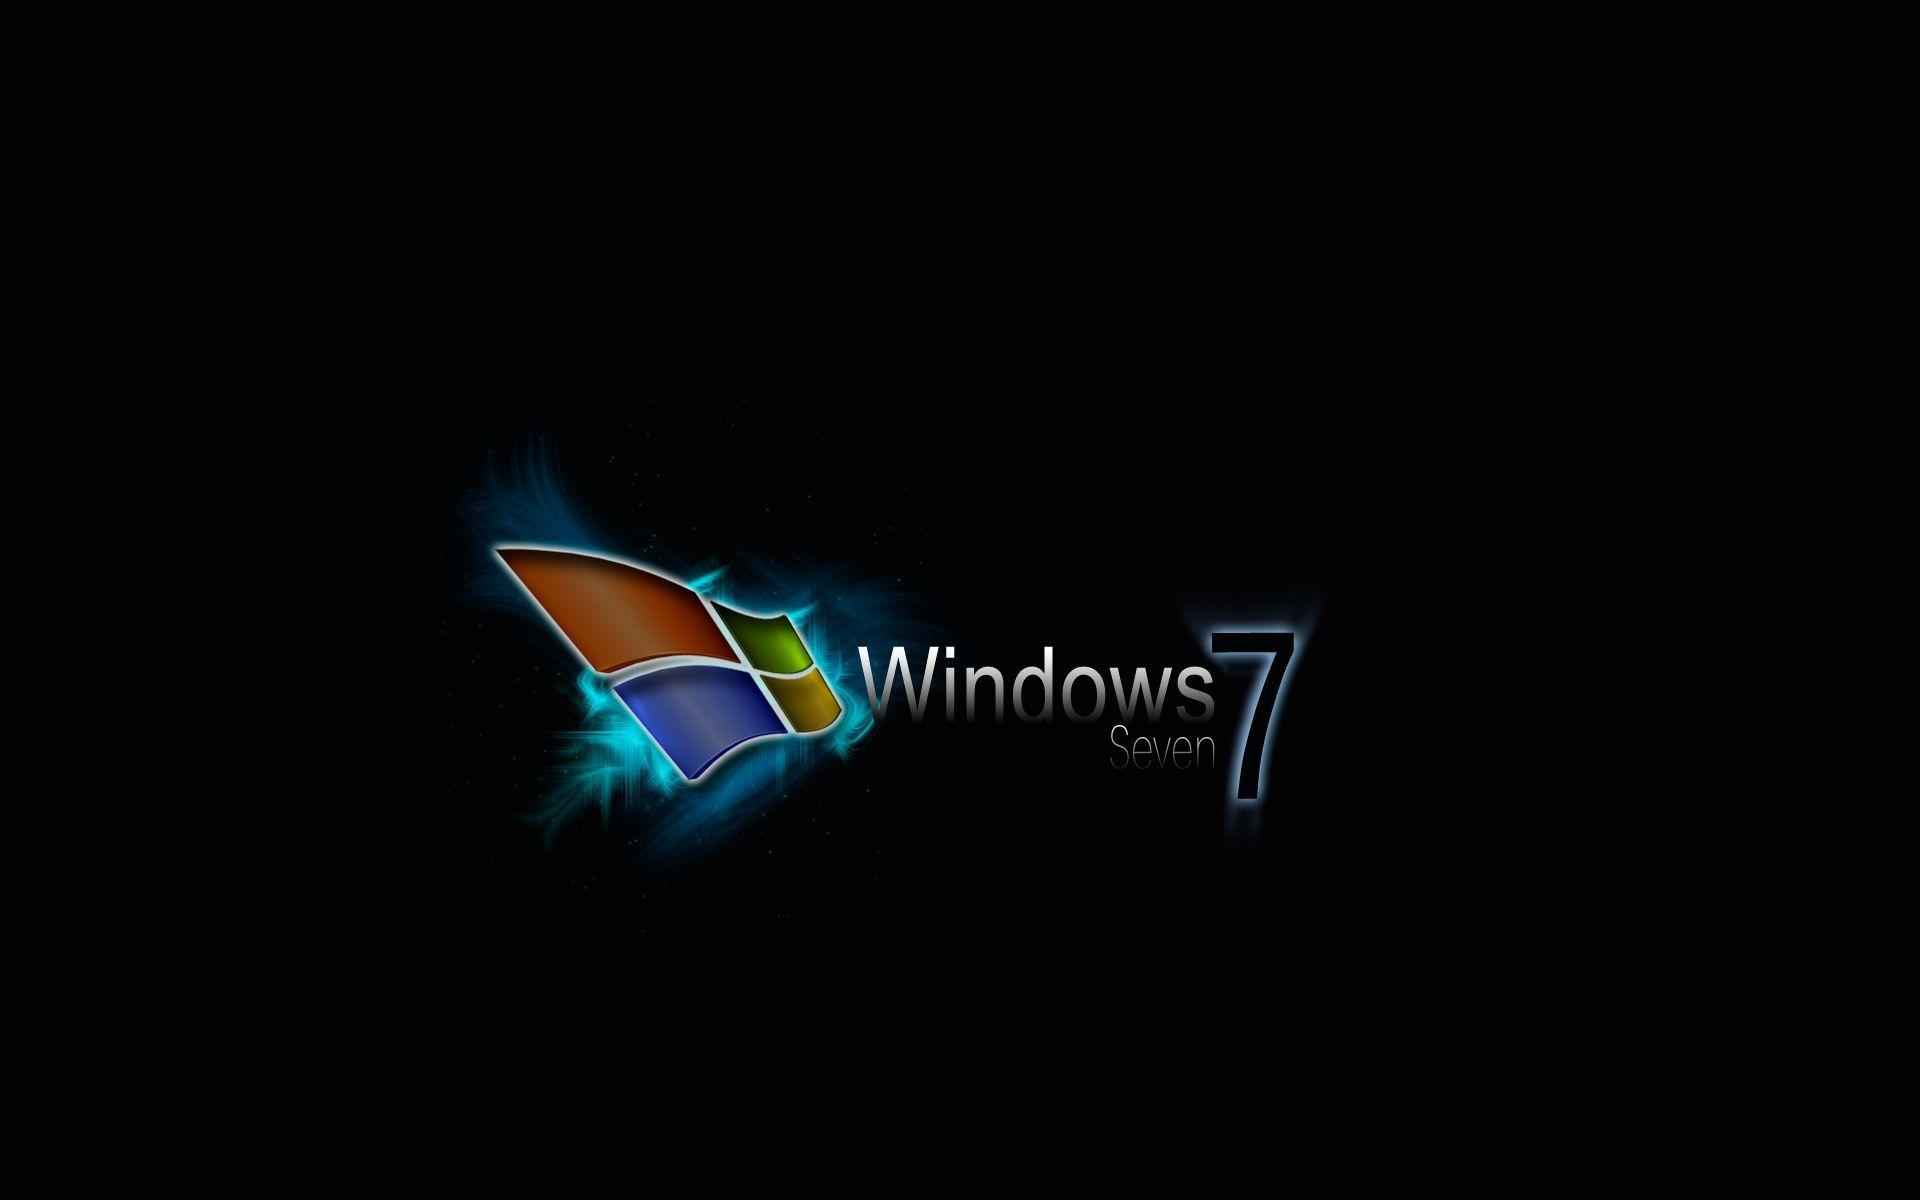 How to Fix the Black Wallpaper Bug on Windows 7